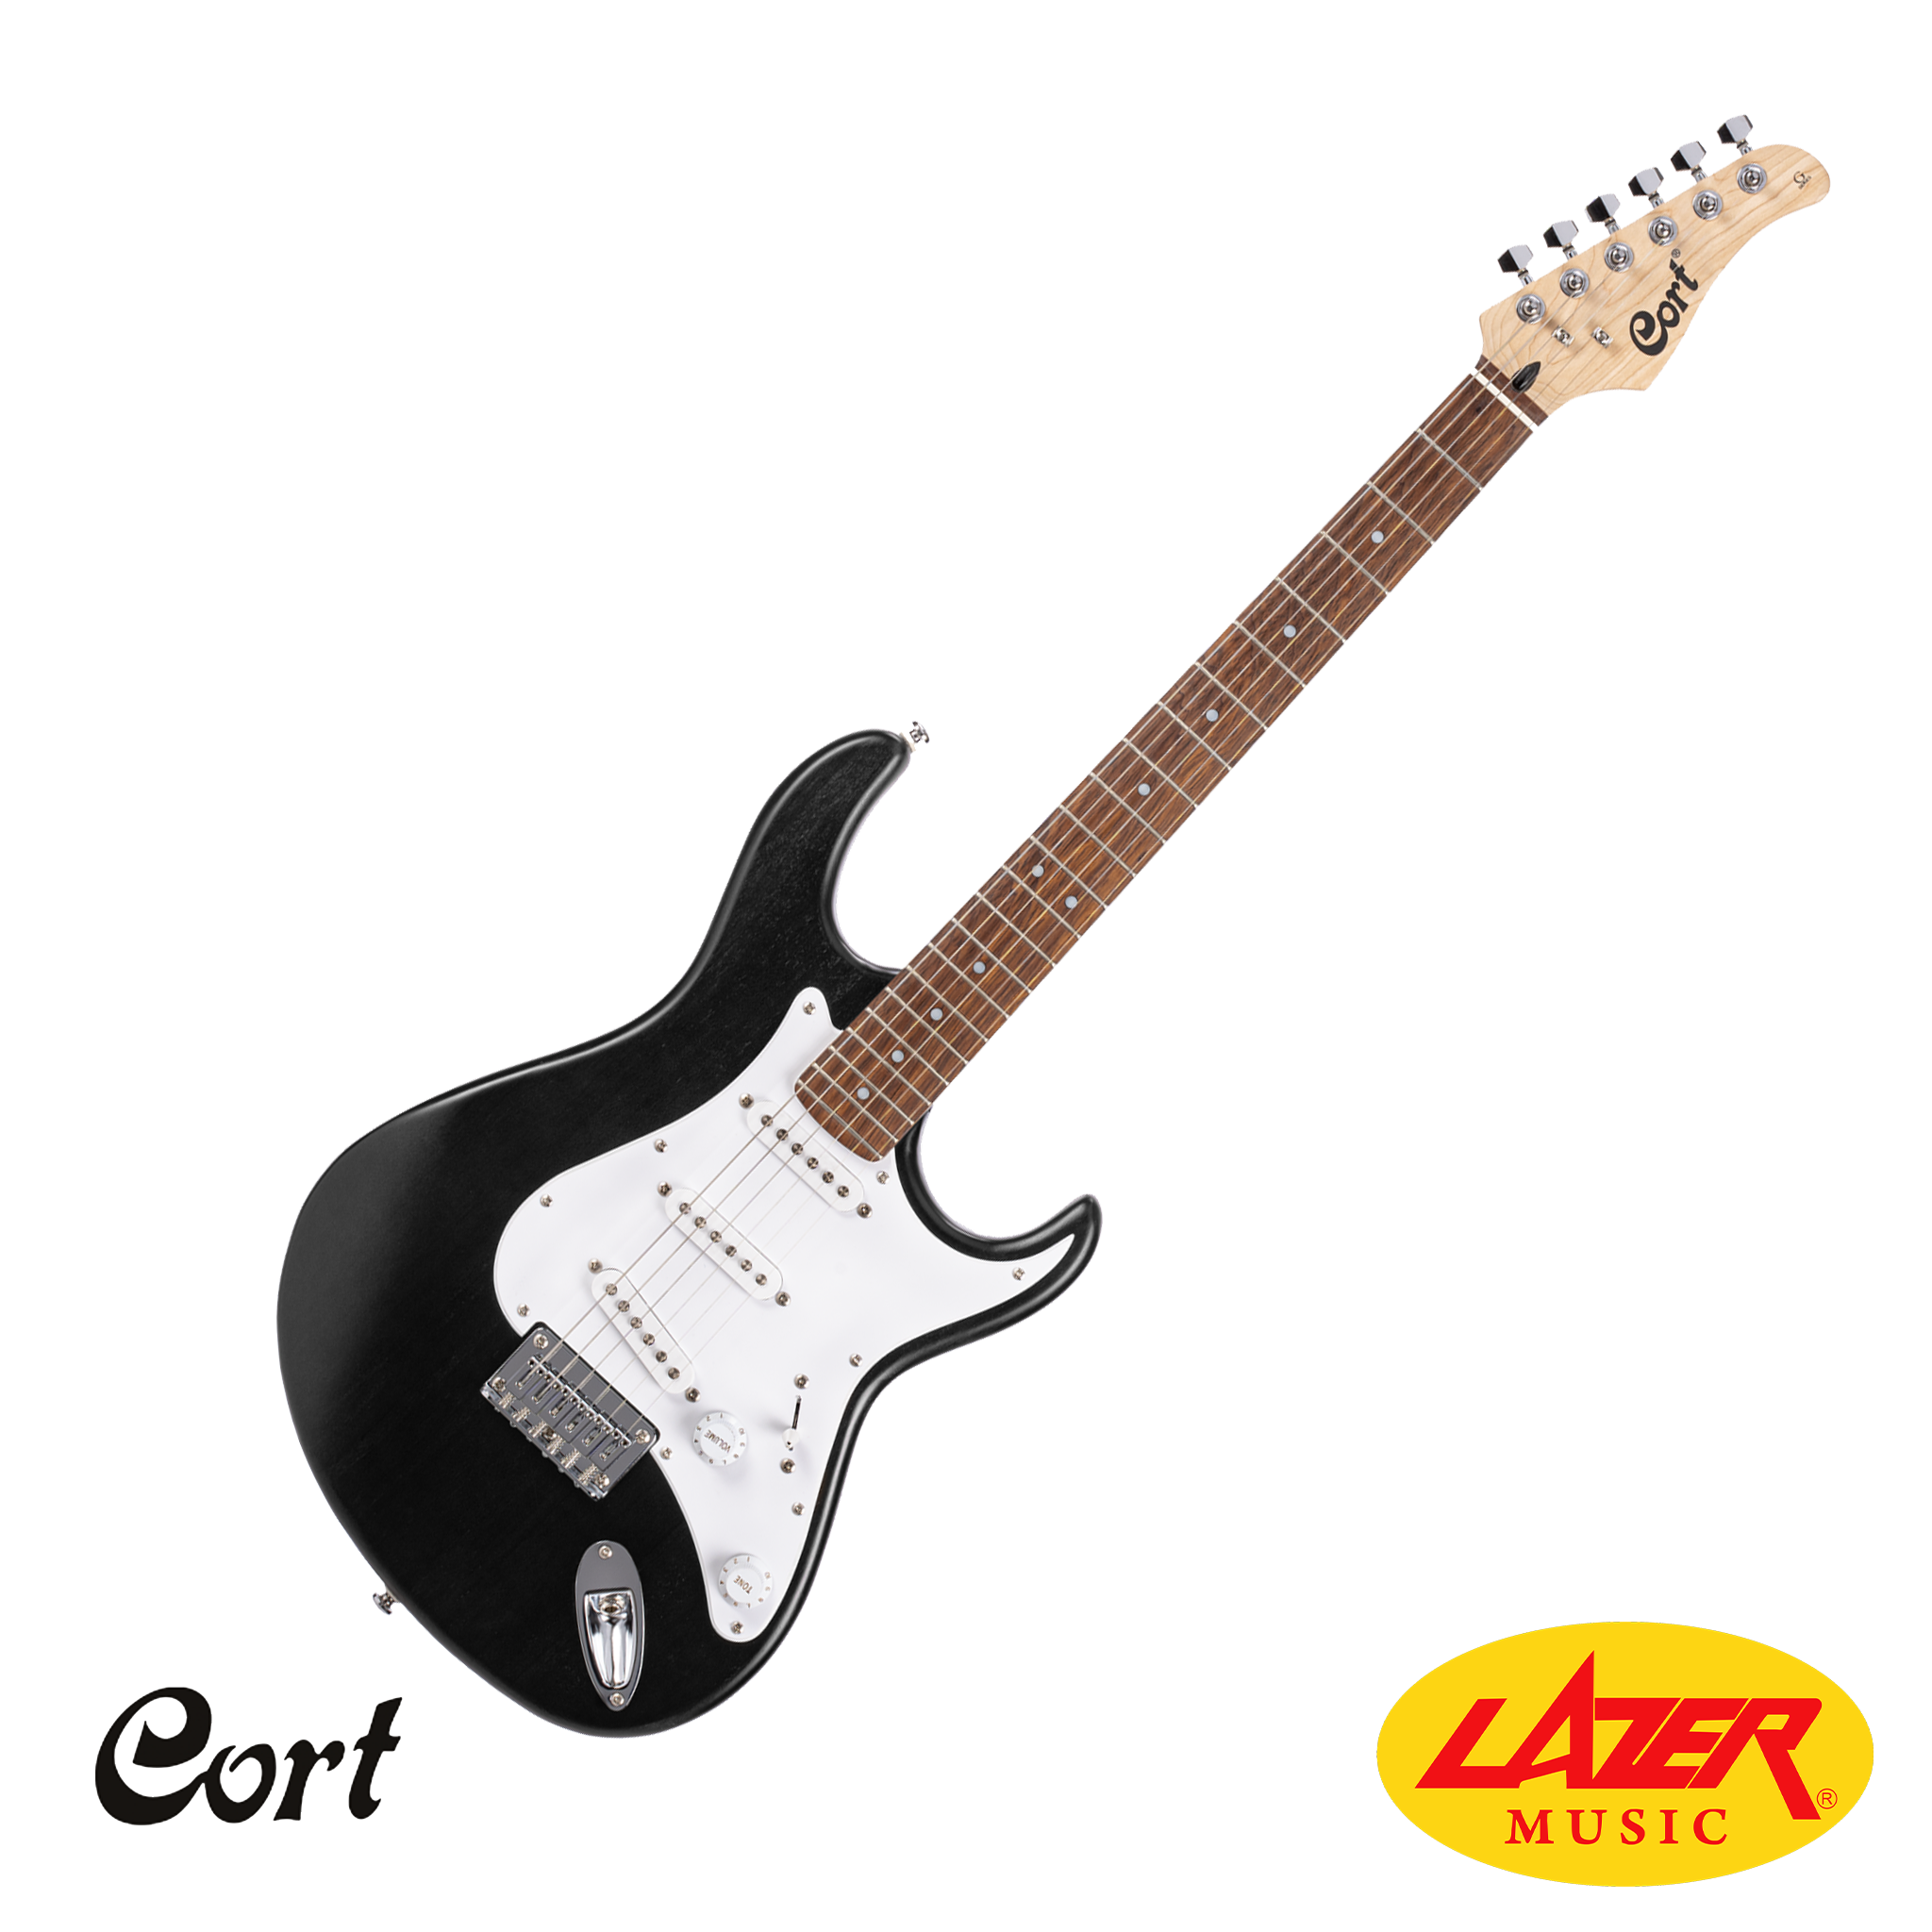 Cort G100 Double Cut Away Electric Guitar with Bag